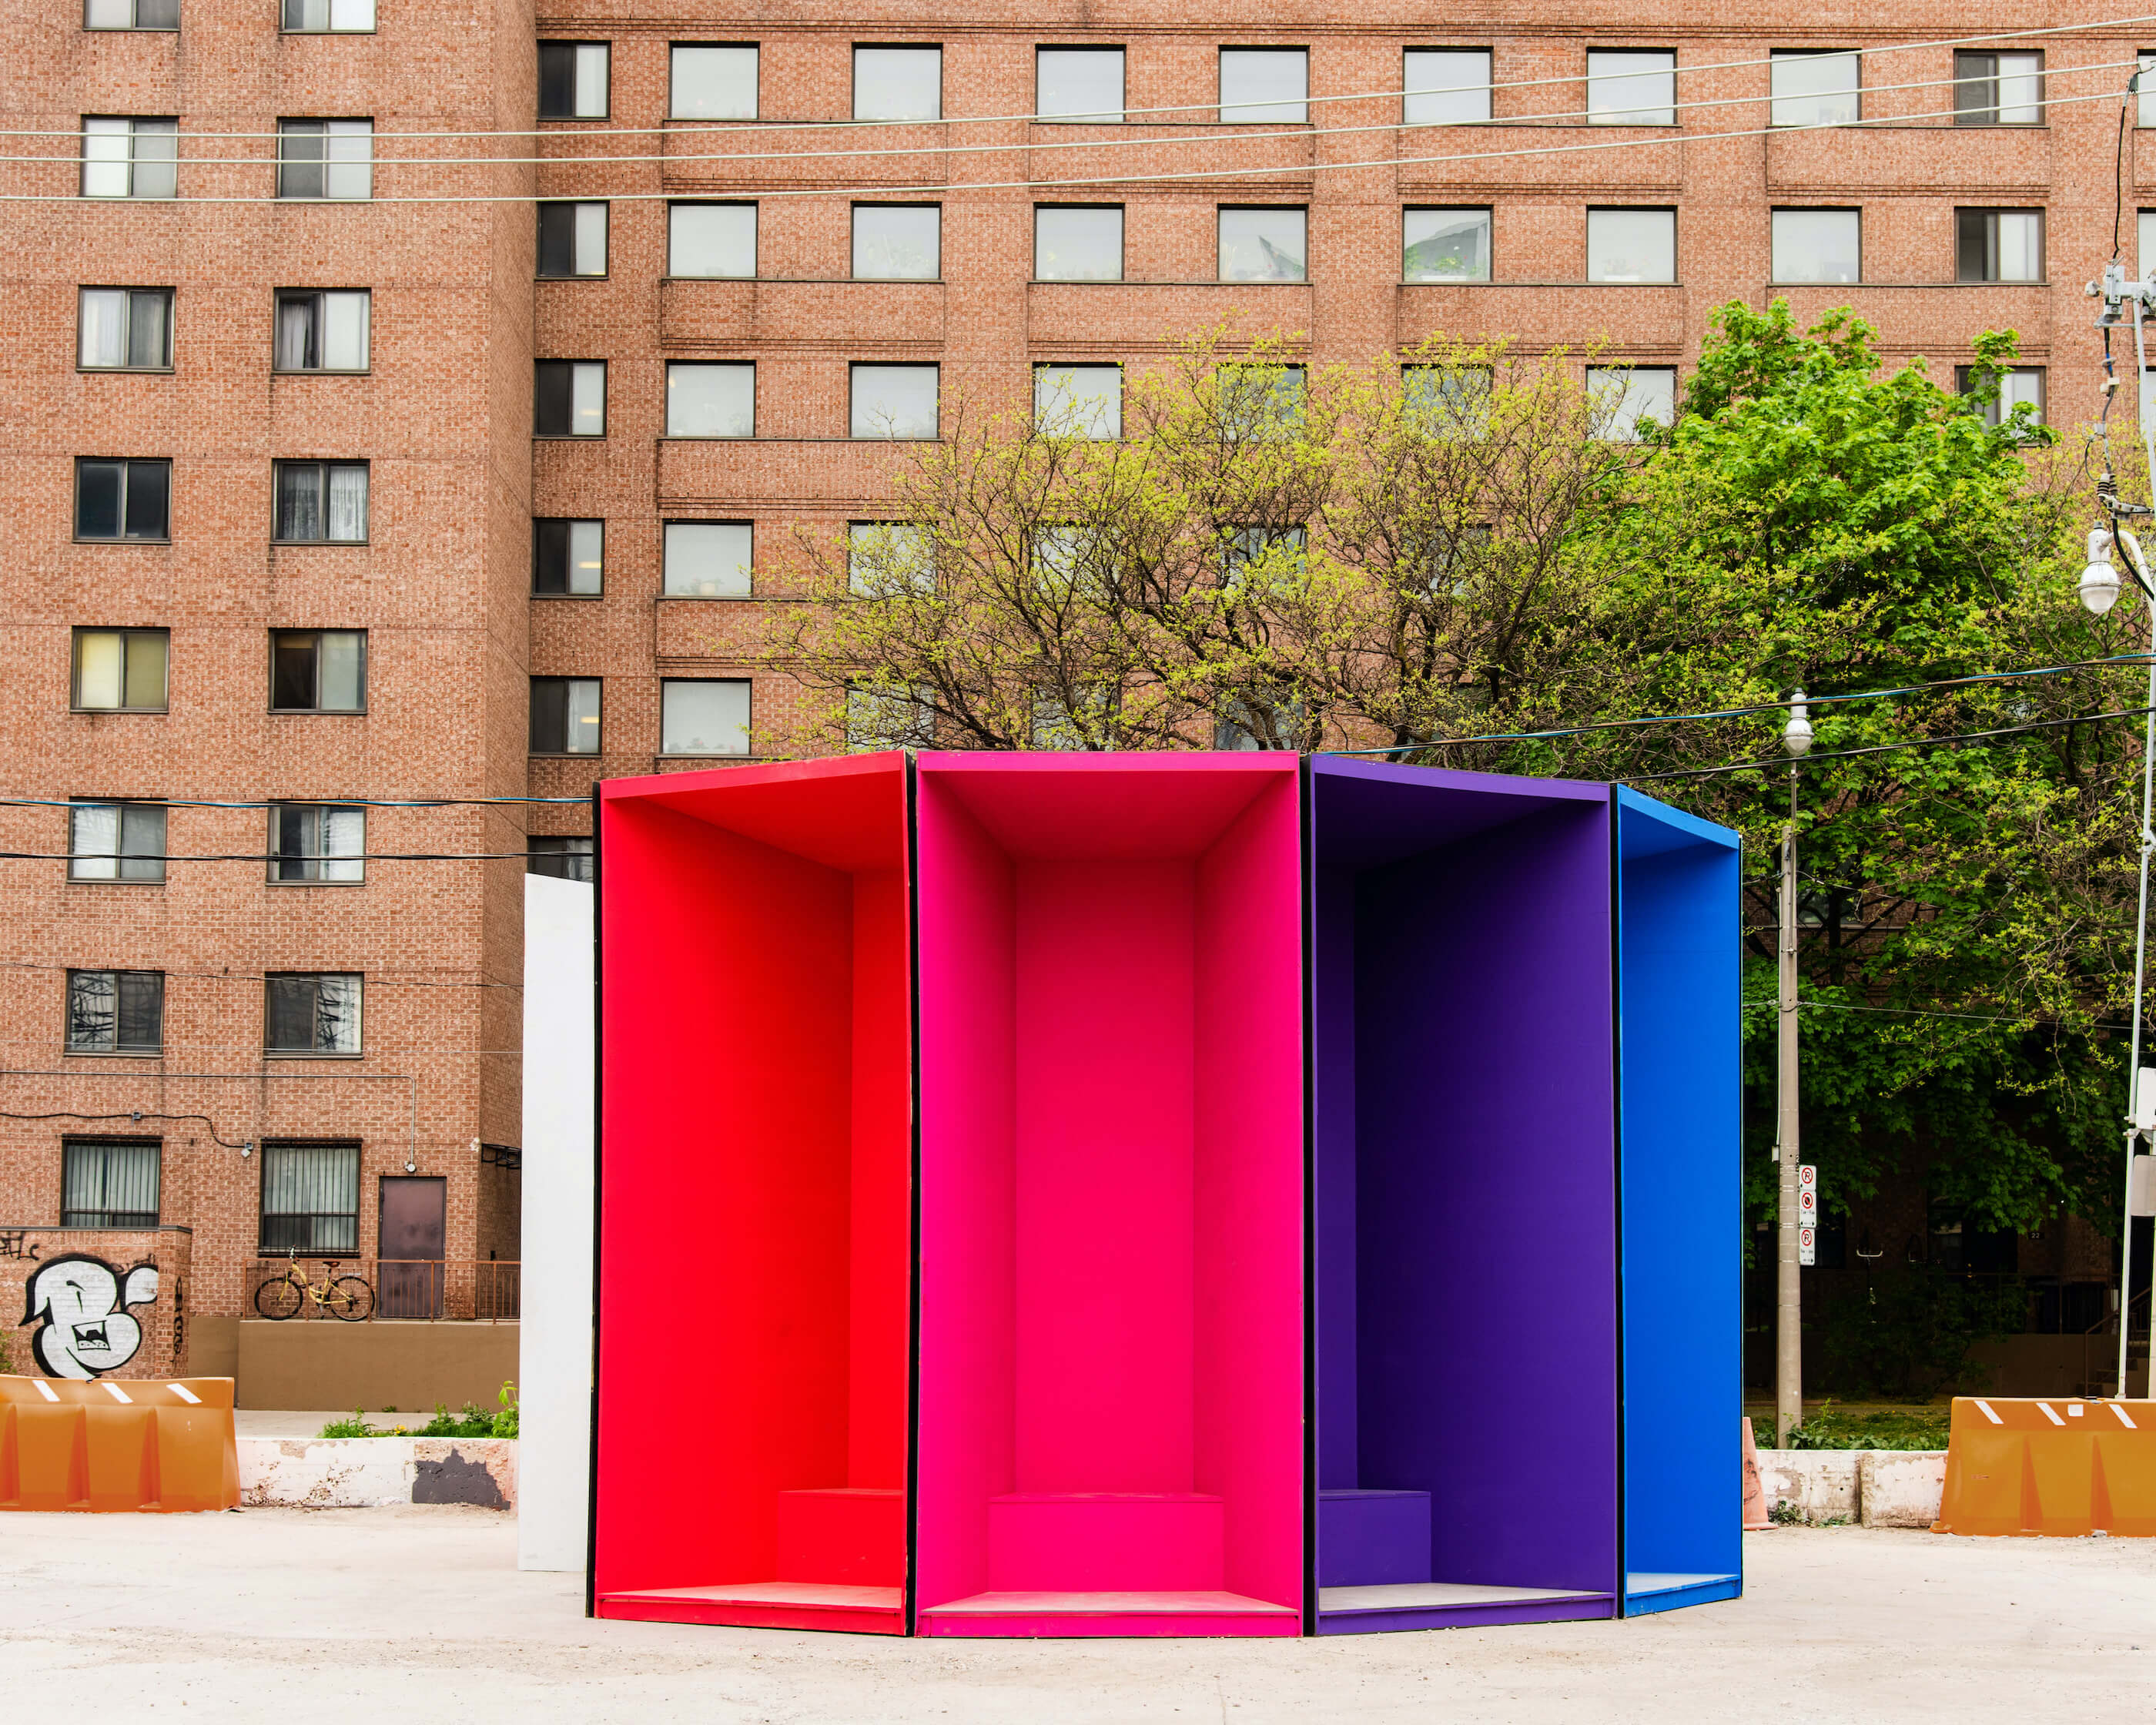 a colorful temporary pavilion with a brick apartment building in the background